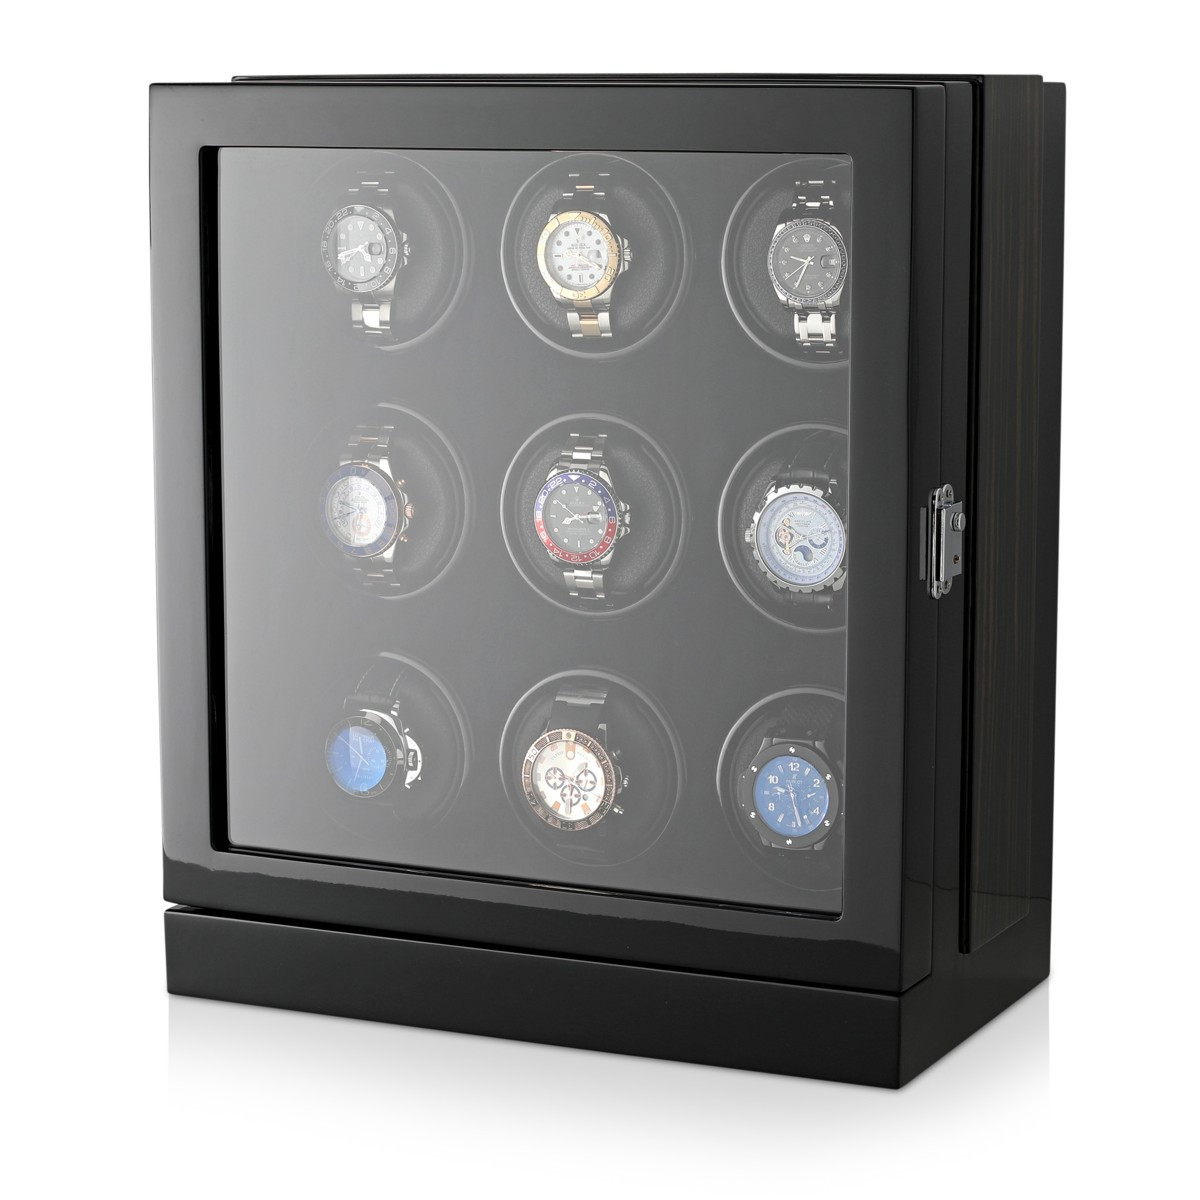 9 Watch Winder WW-8204-BMB for Automatic Watches